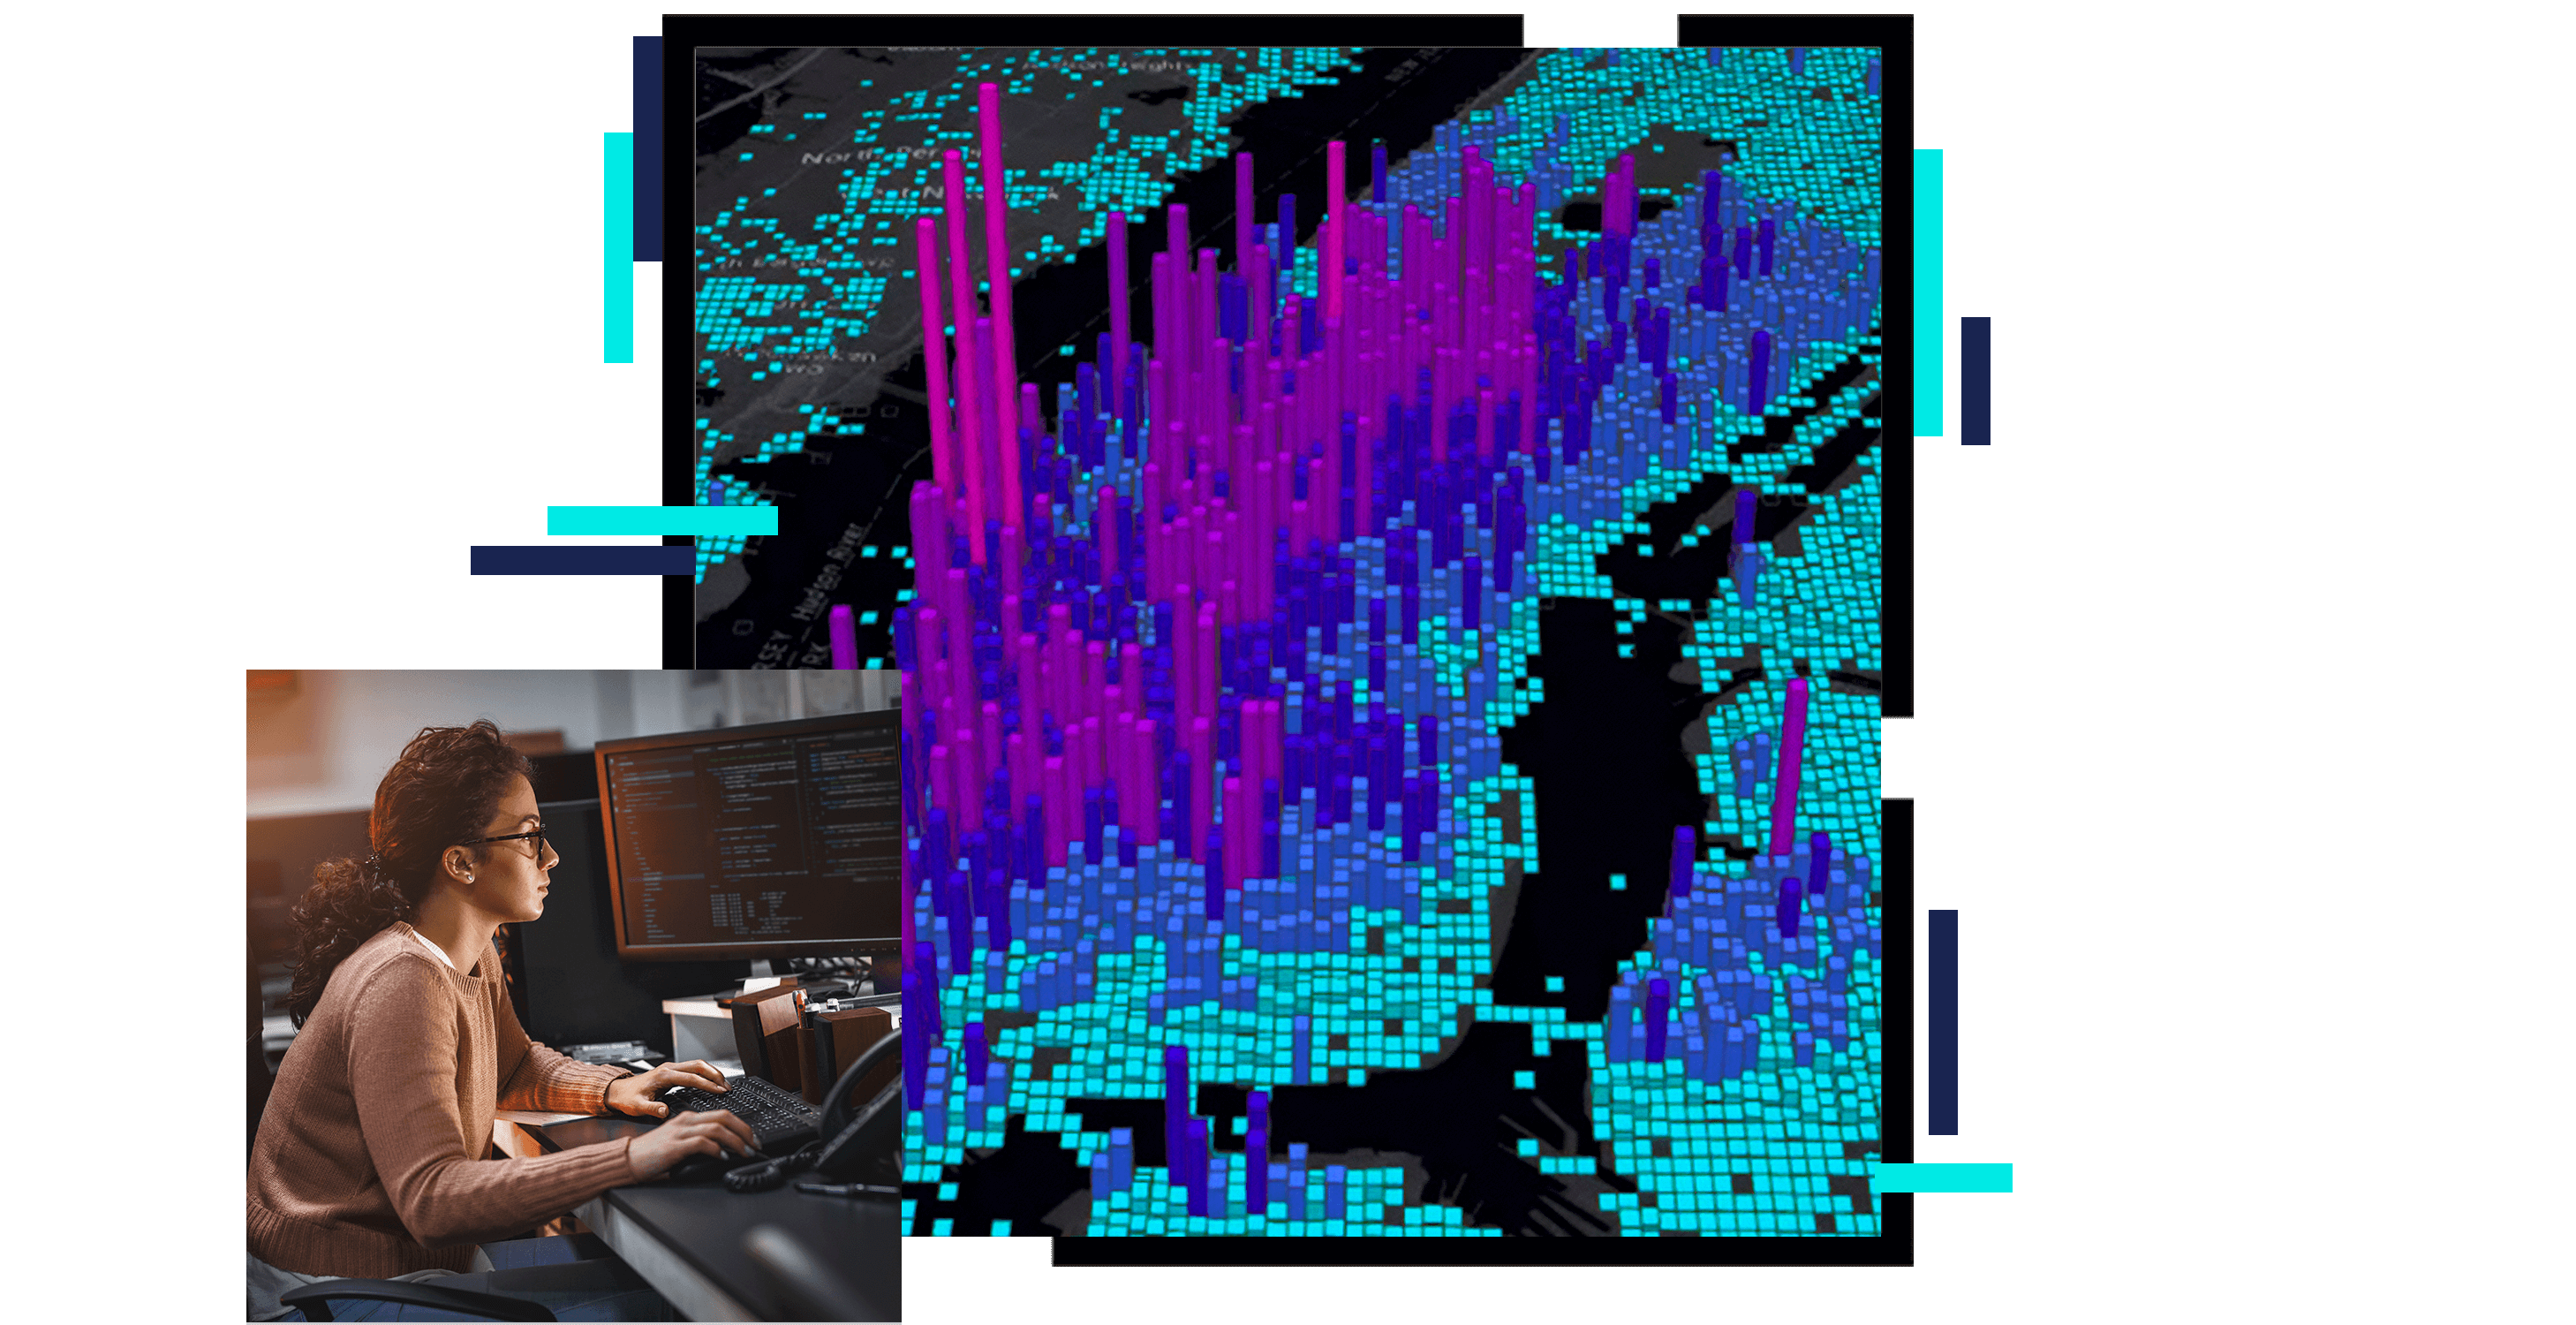 A concentration map in purple and blue on a black background, overlaid with a photo of a person working on a desktop computer in a softly lit gray cubicle